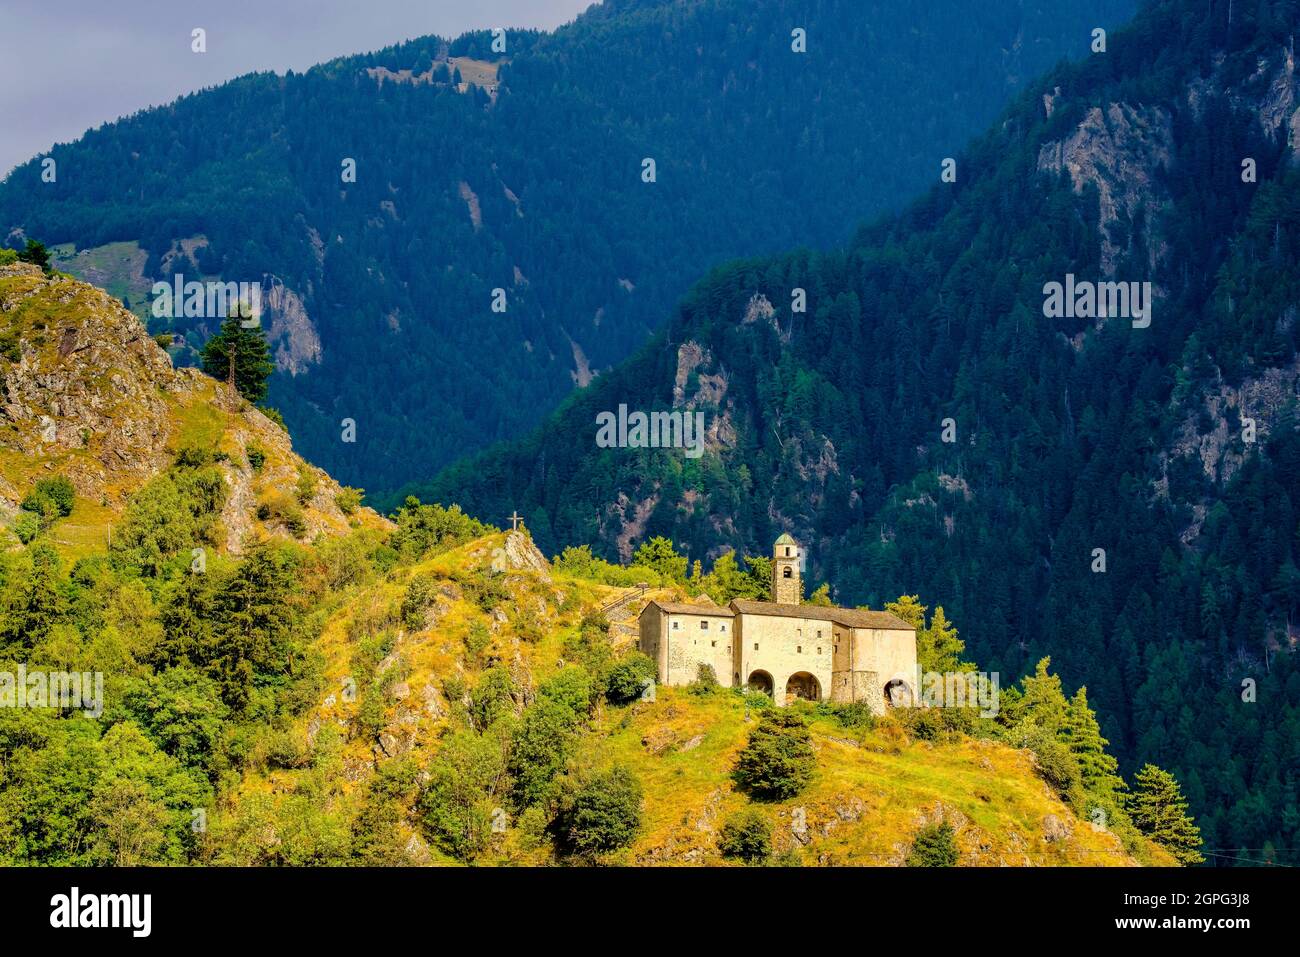 Magnificent view of St. Agnese church. Sondalo, Valtellina, Lombardy, Italy. Stock Photo